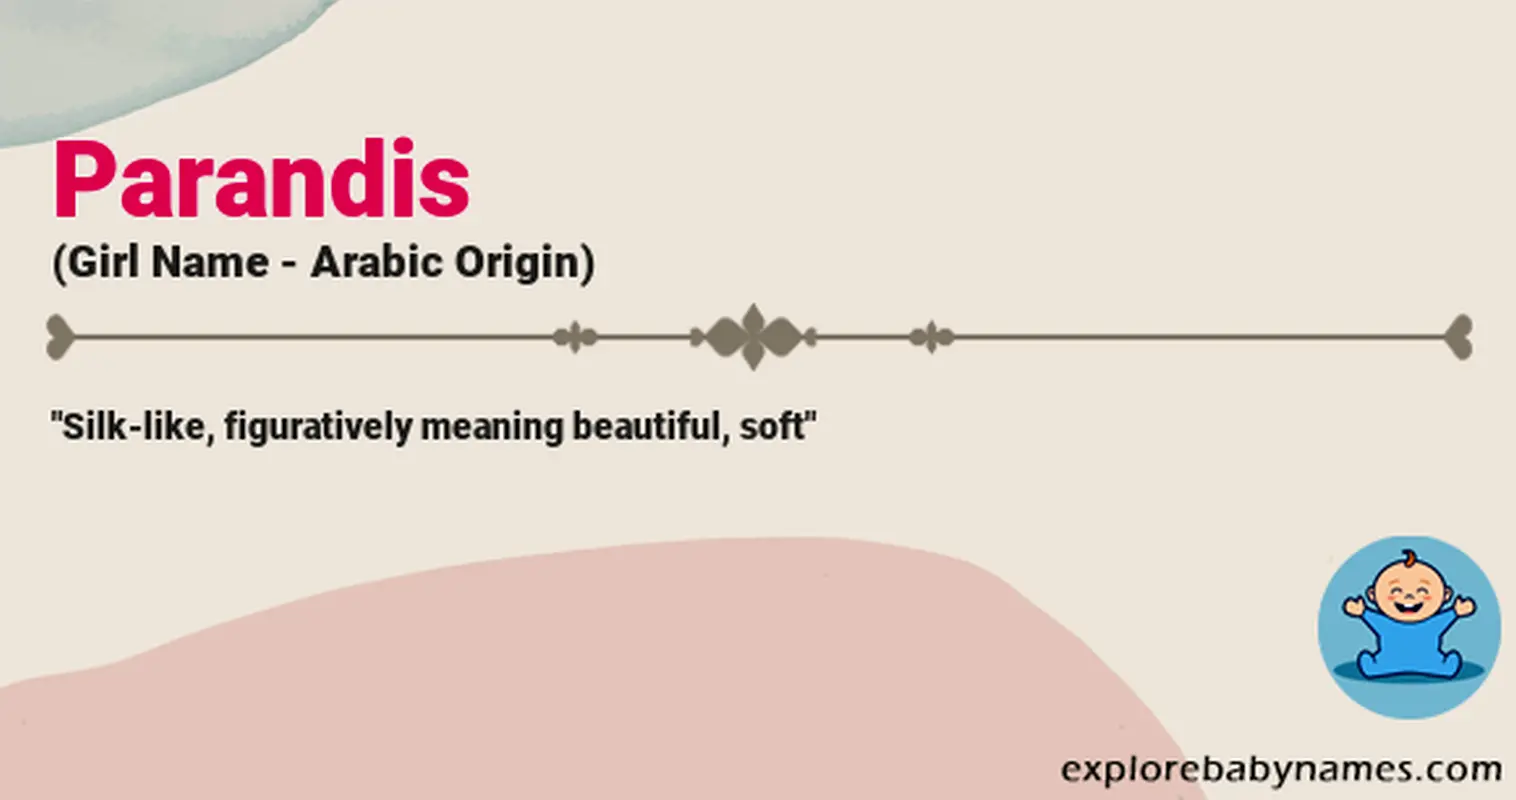 Meaning of Parandis